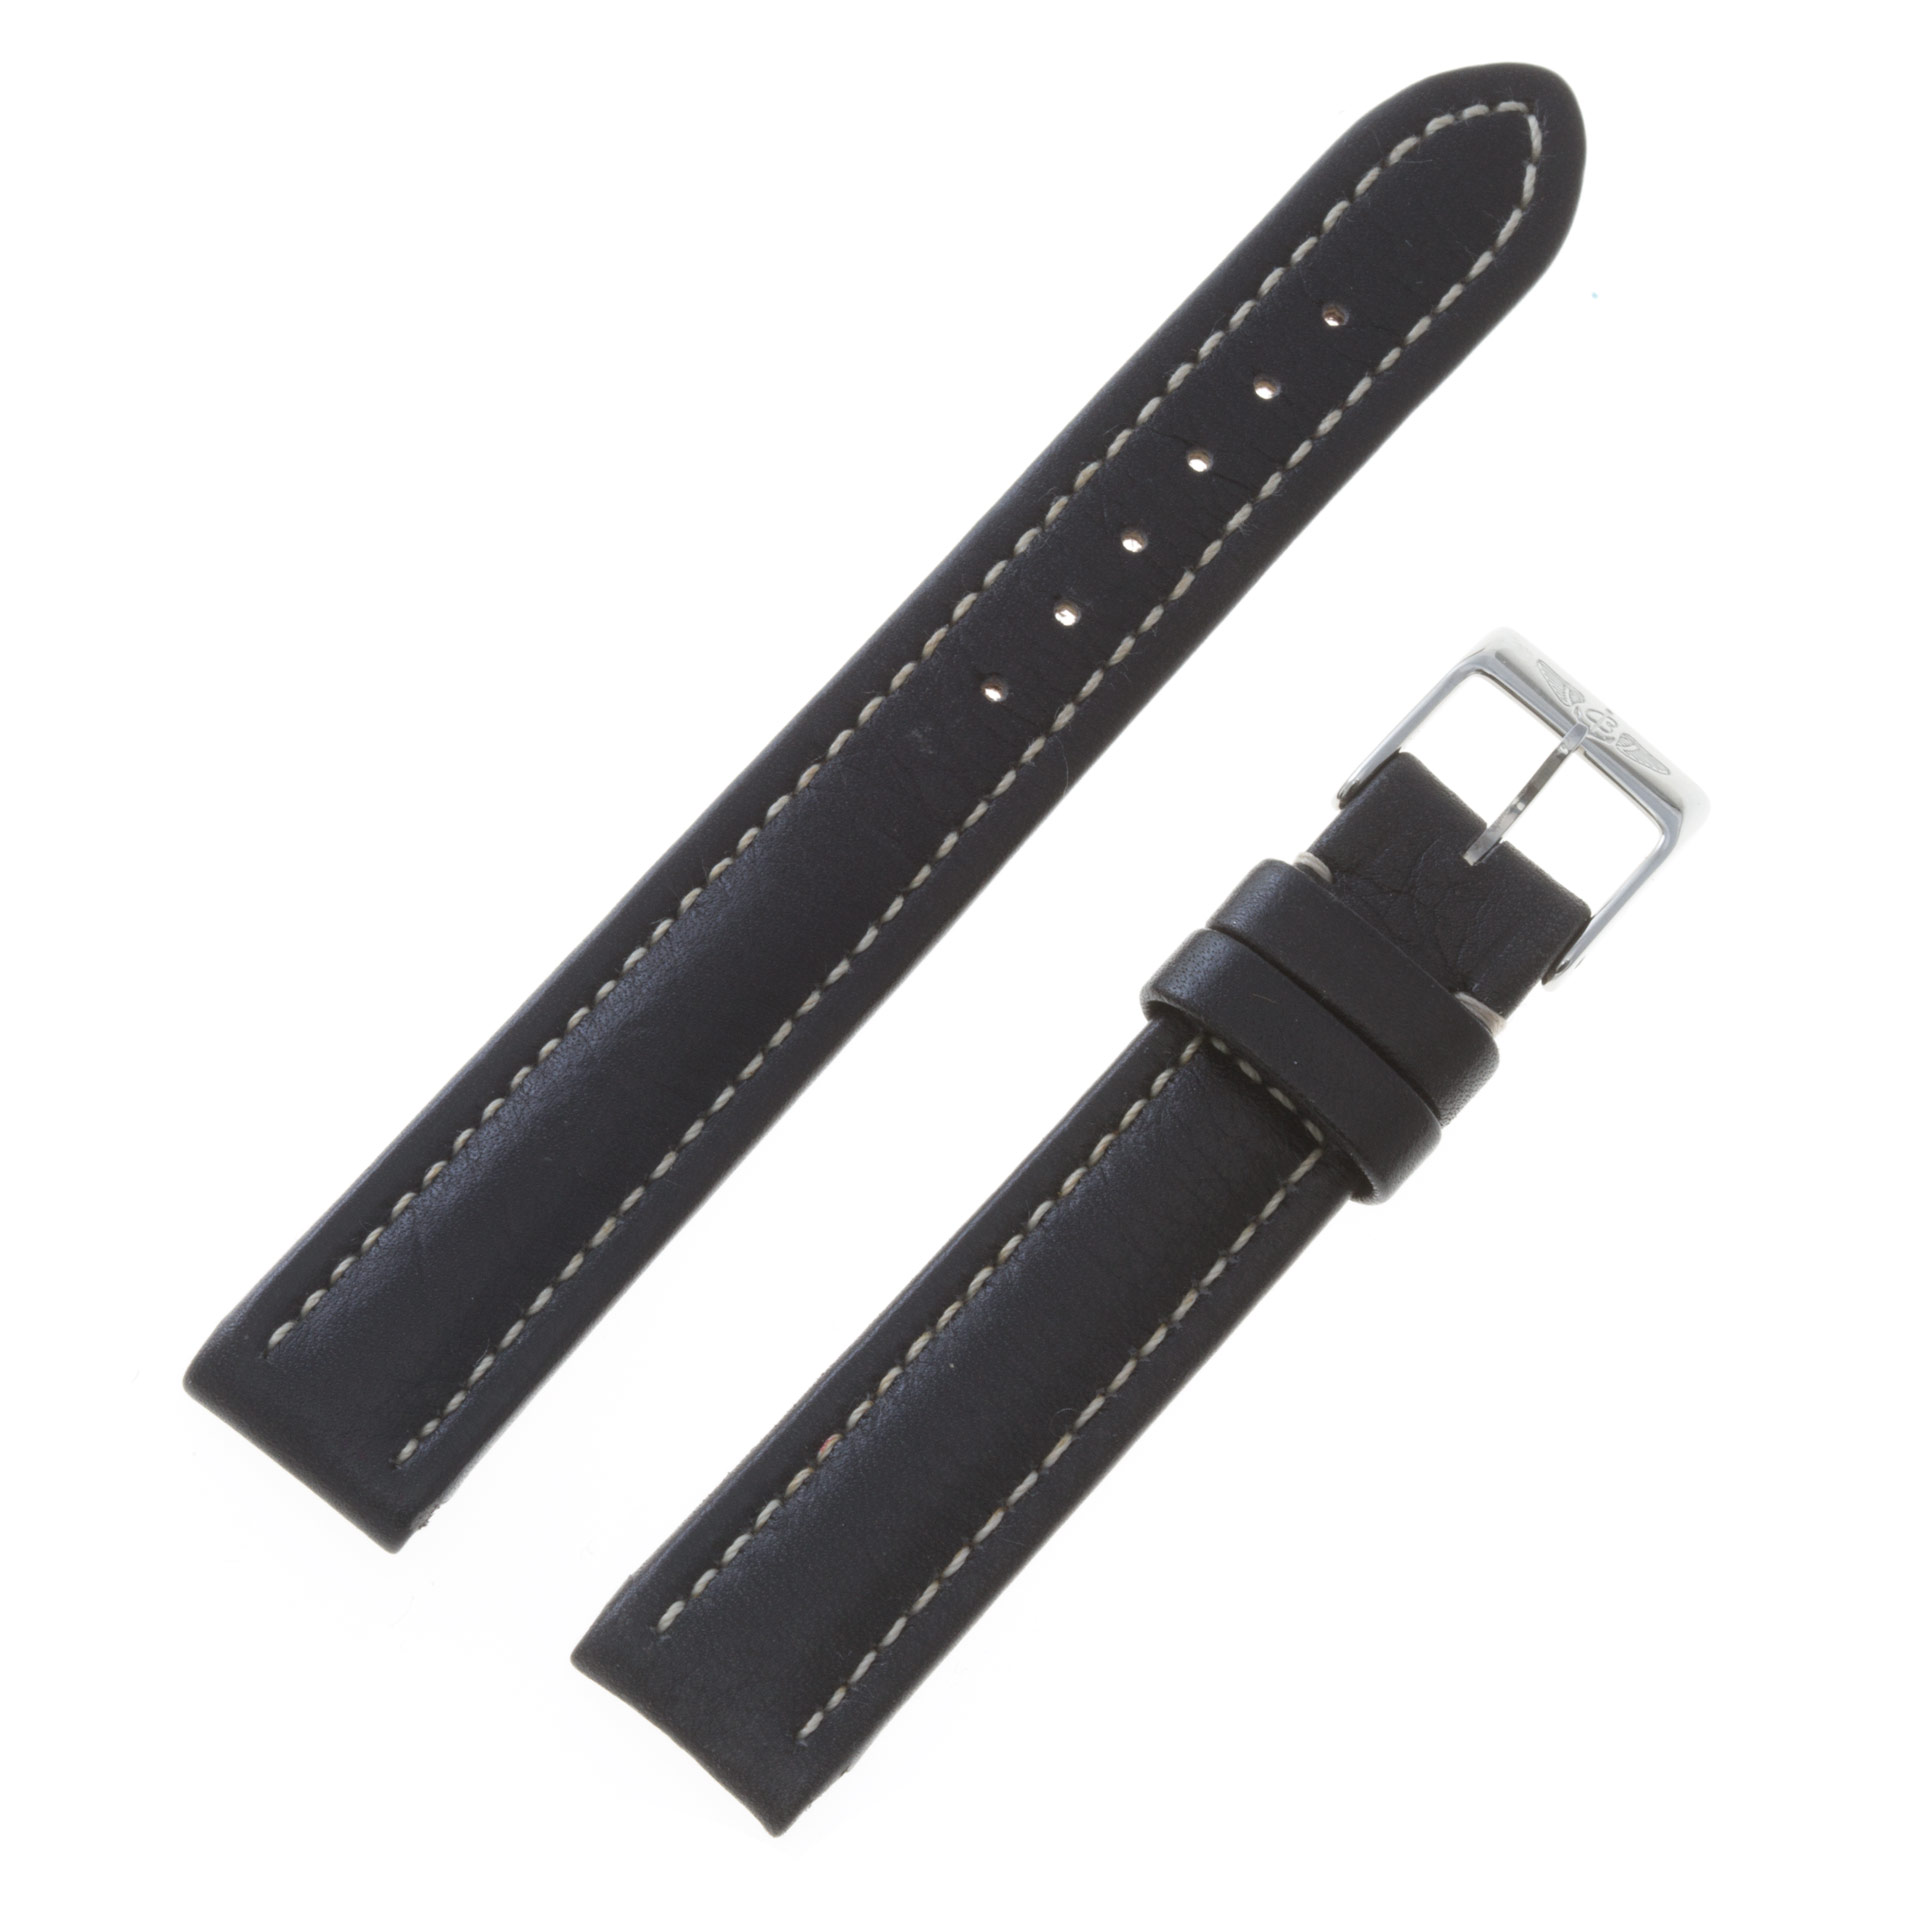 Breitling black leather strap with white stitching with original tang buckle  15mm x 14mm